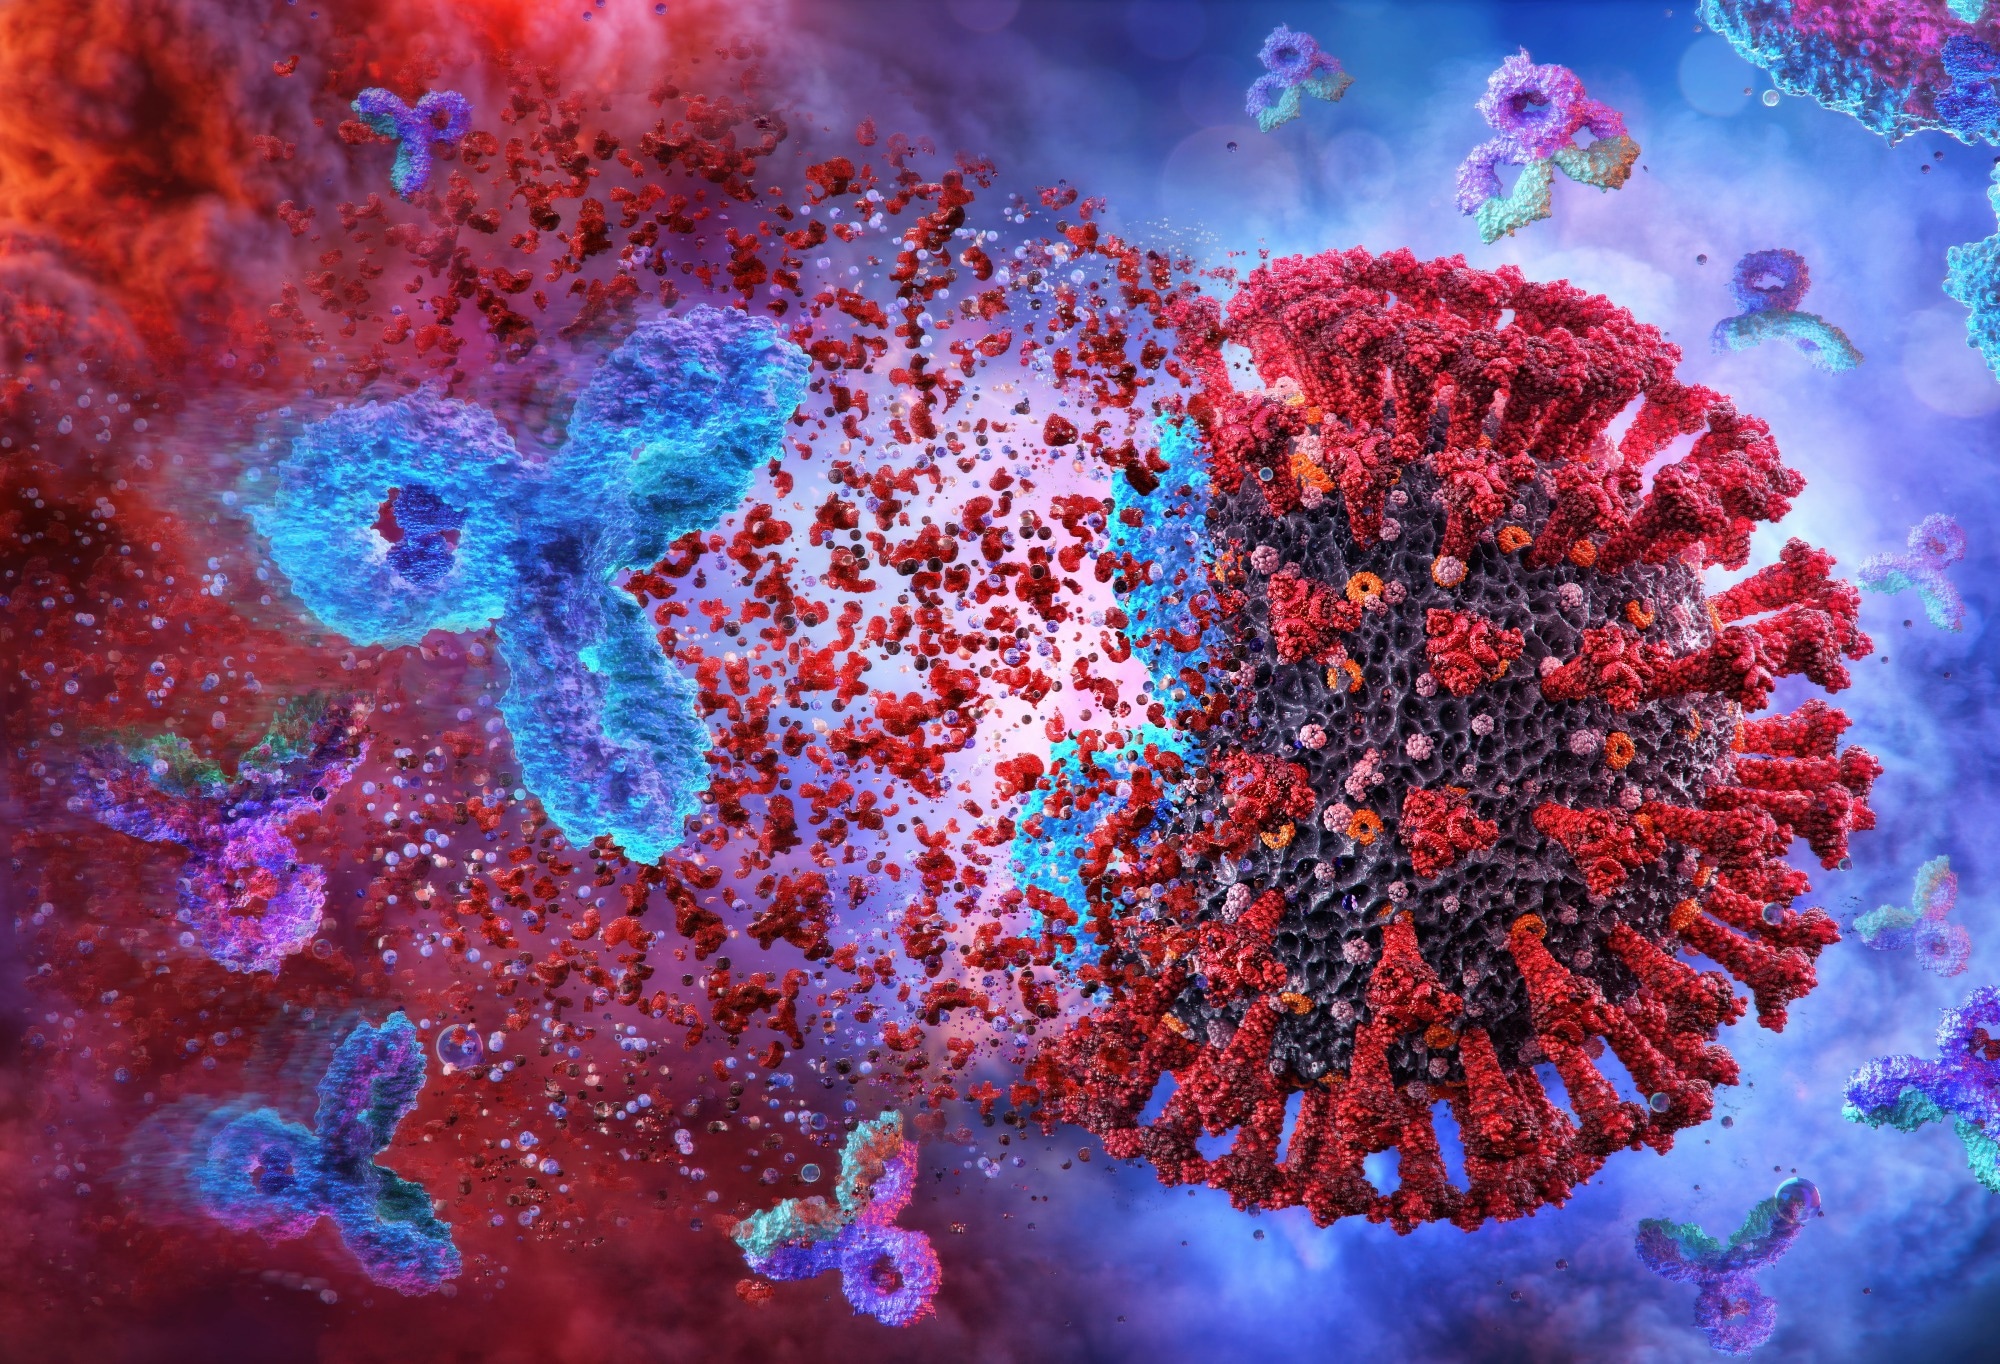 Study: Potent monoclonal antibodies neutralize Omicron sublineages and other SARS-CoV-2 variants. Image Credit: Corona Borealis Studio/Shutterstock